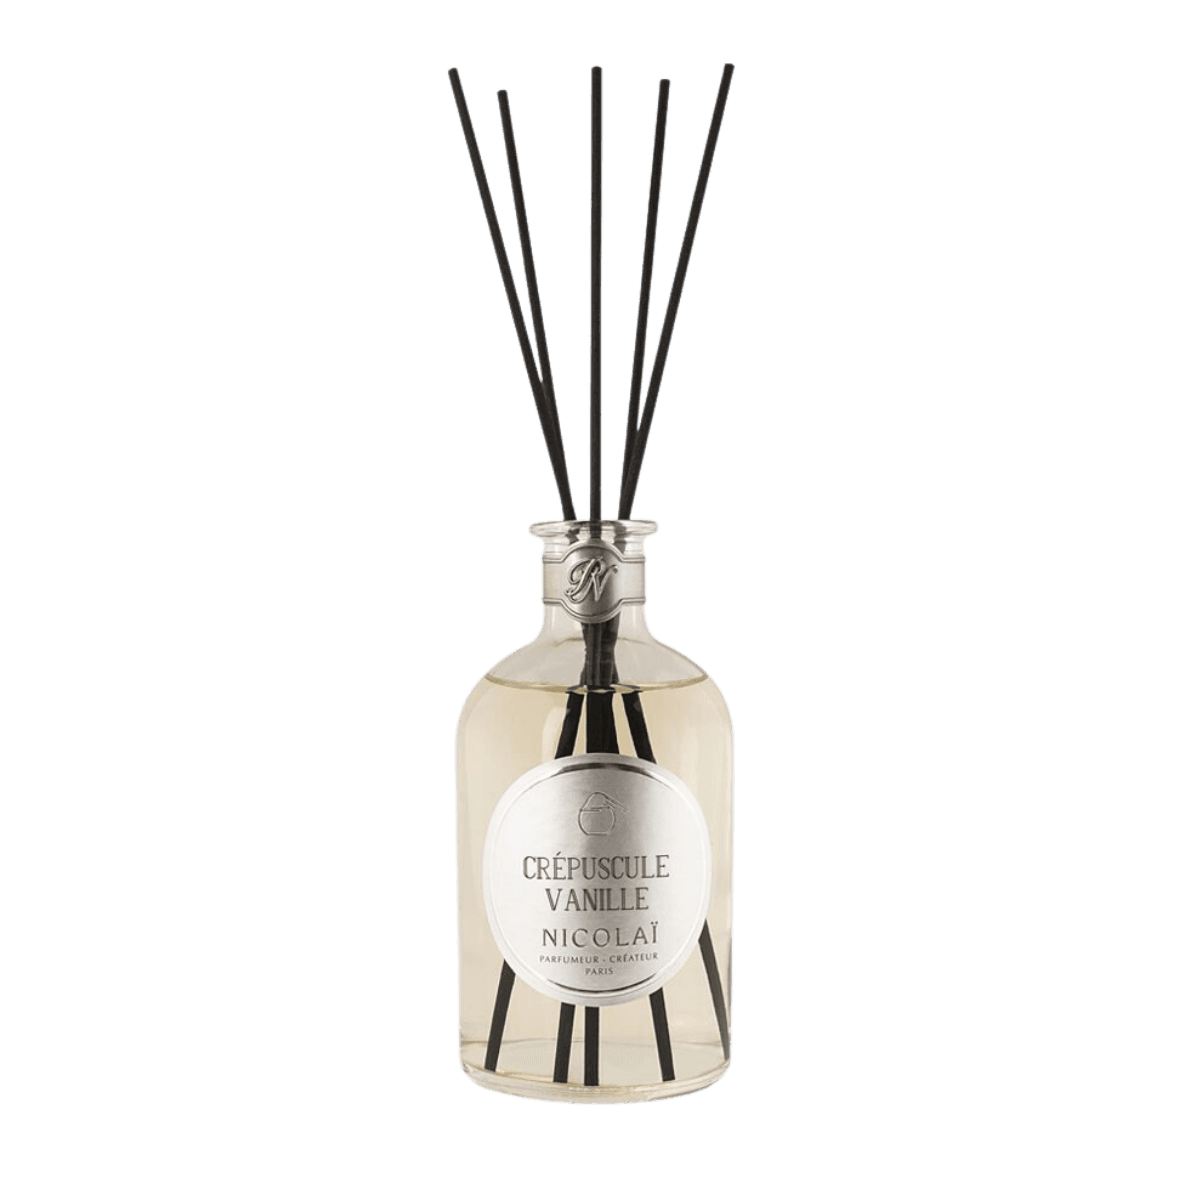 Image of Crepuscule vanille reed diffuser reed diffuser by Nicolai